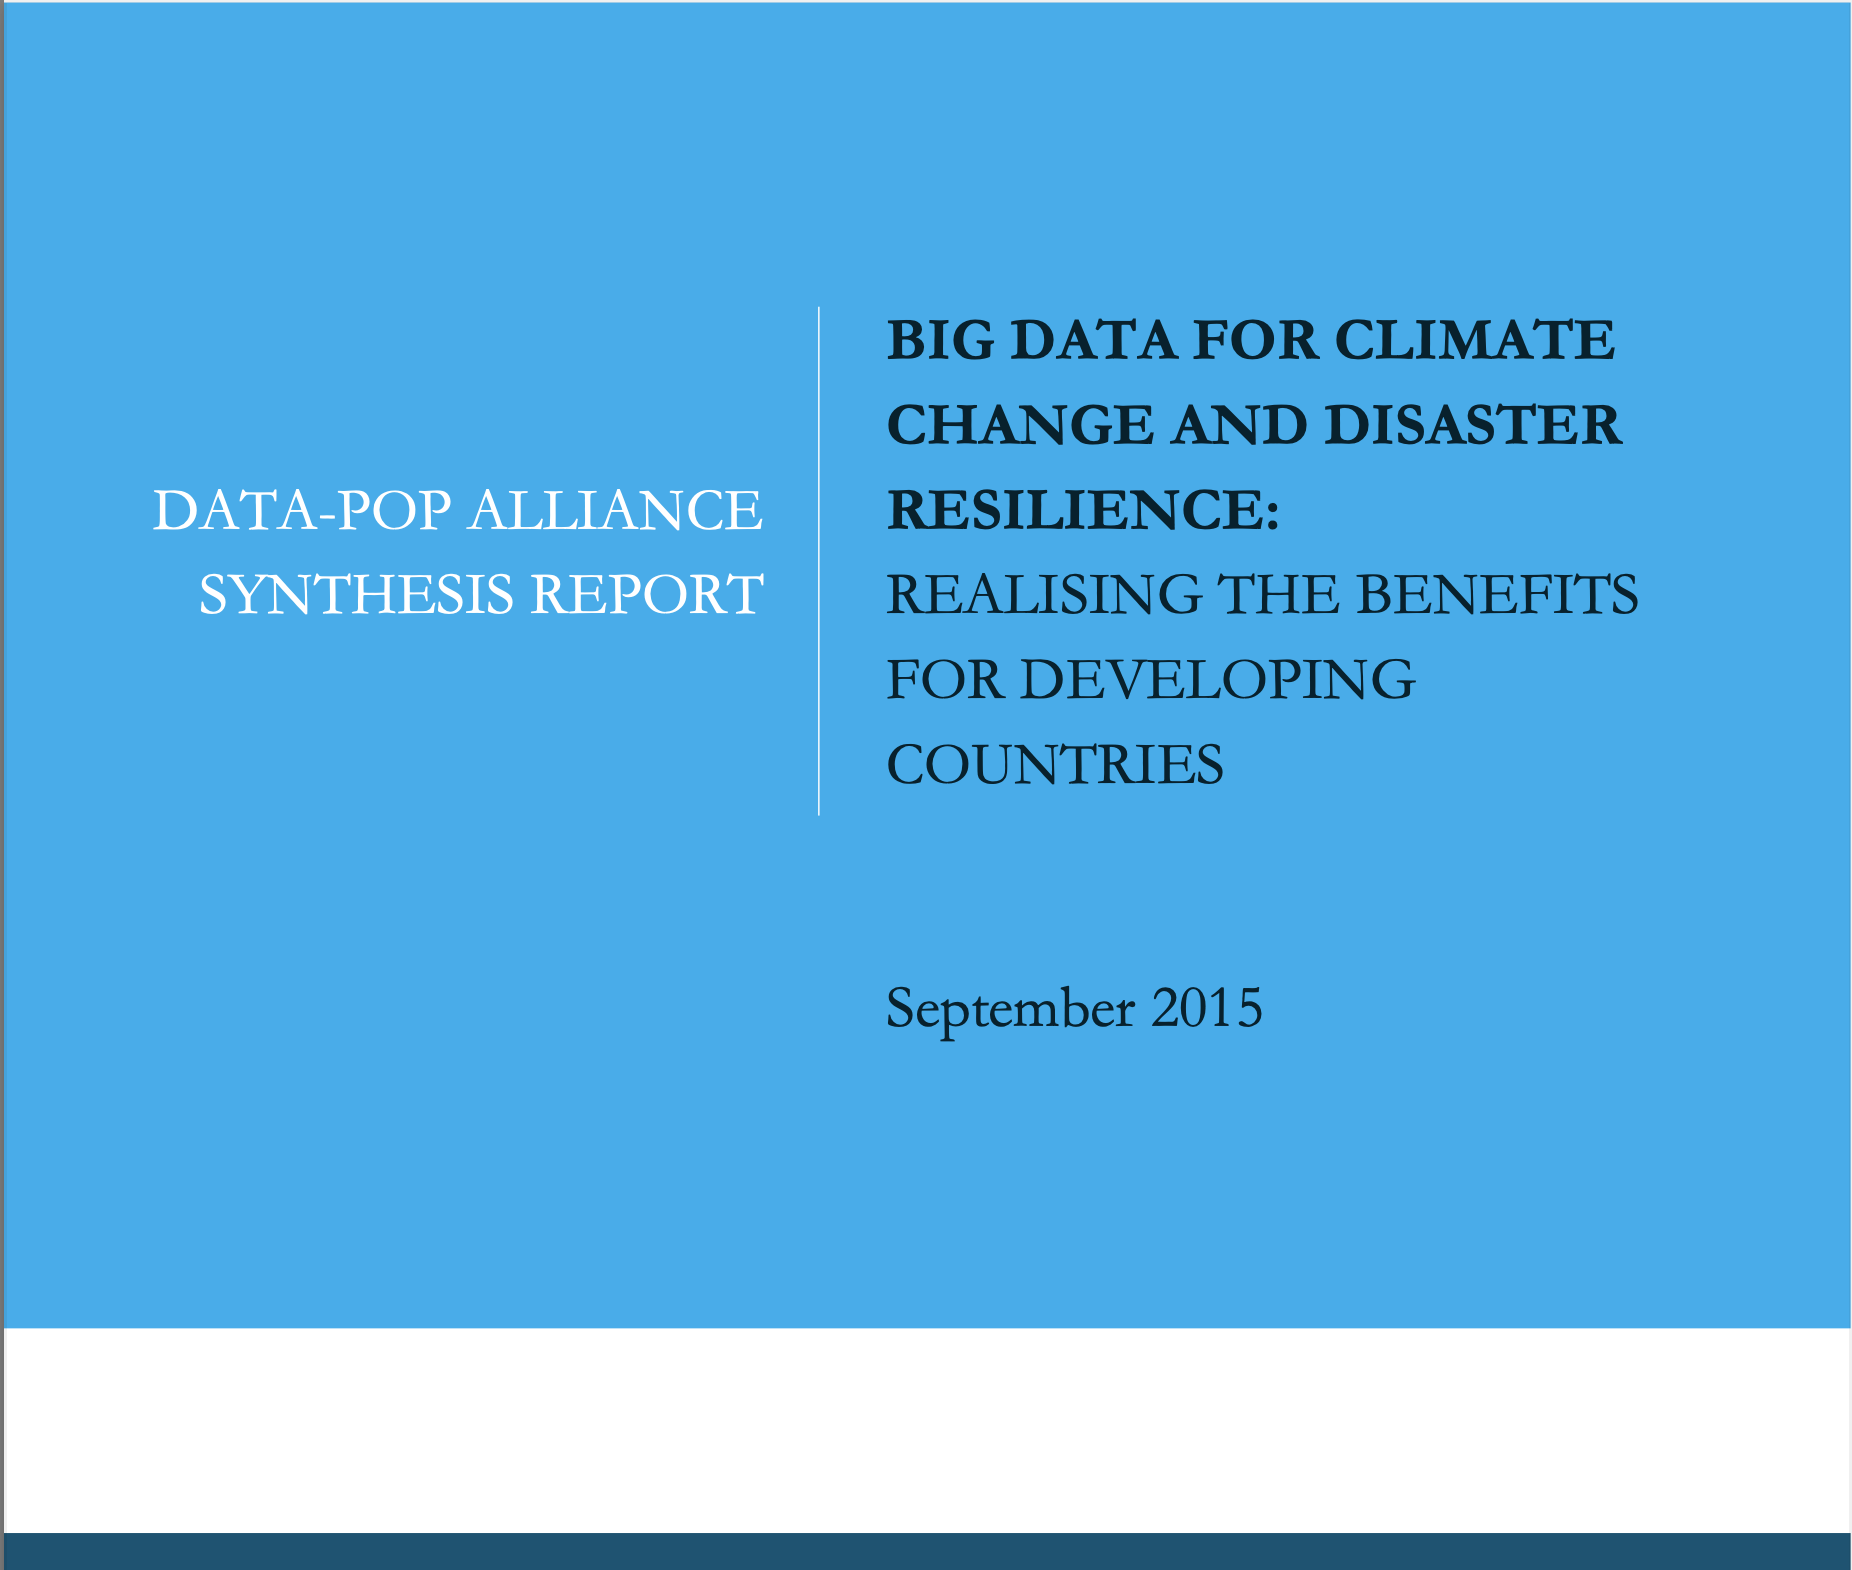 Big Data for Climate Change and Disaster Resilience: Realizing the Benefits for Developing Countries